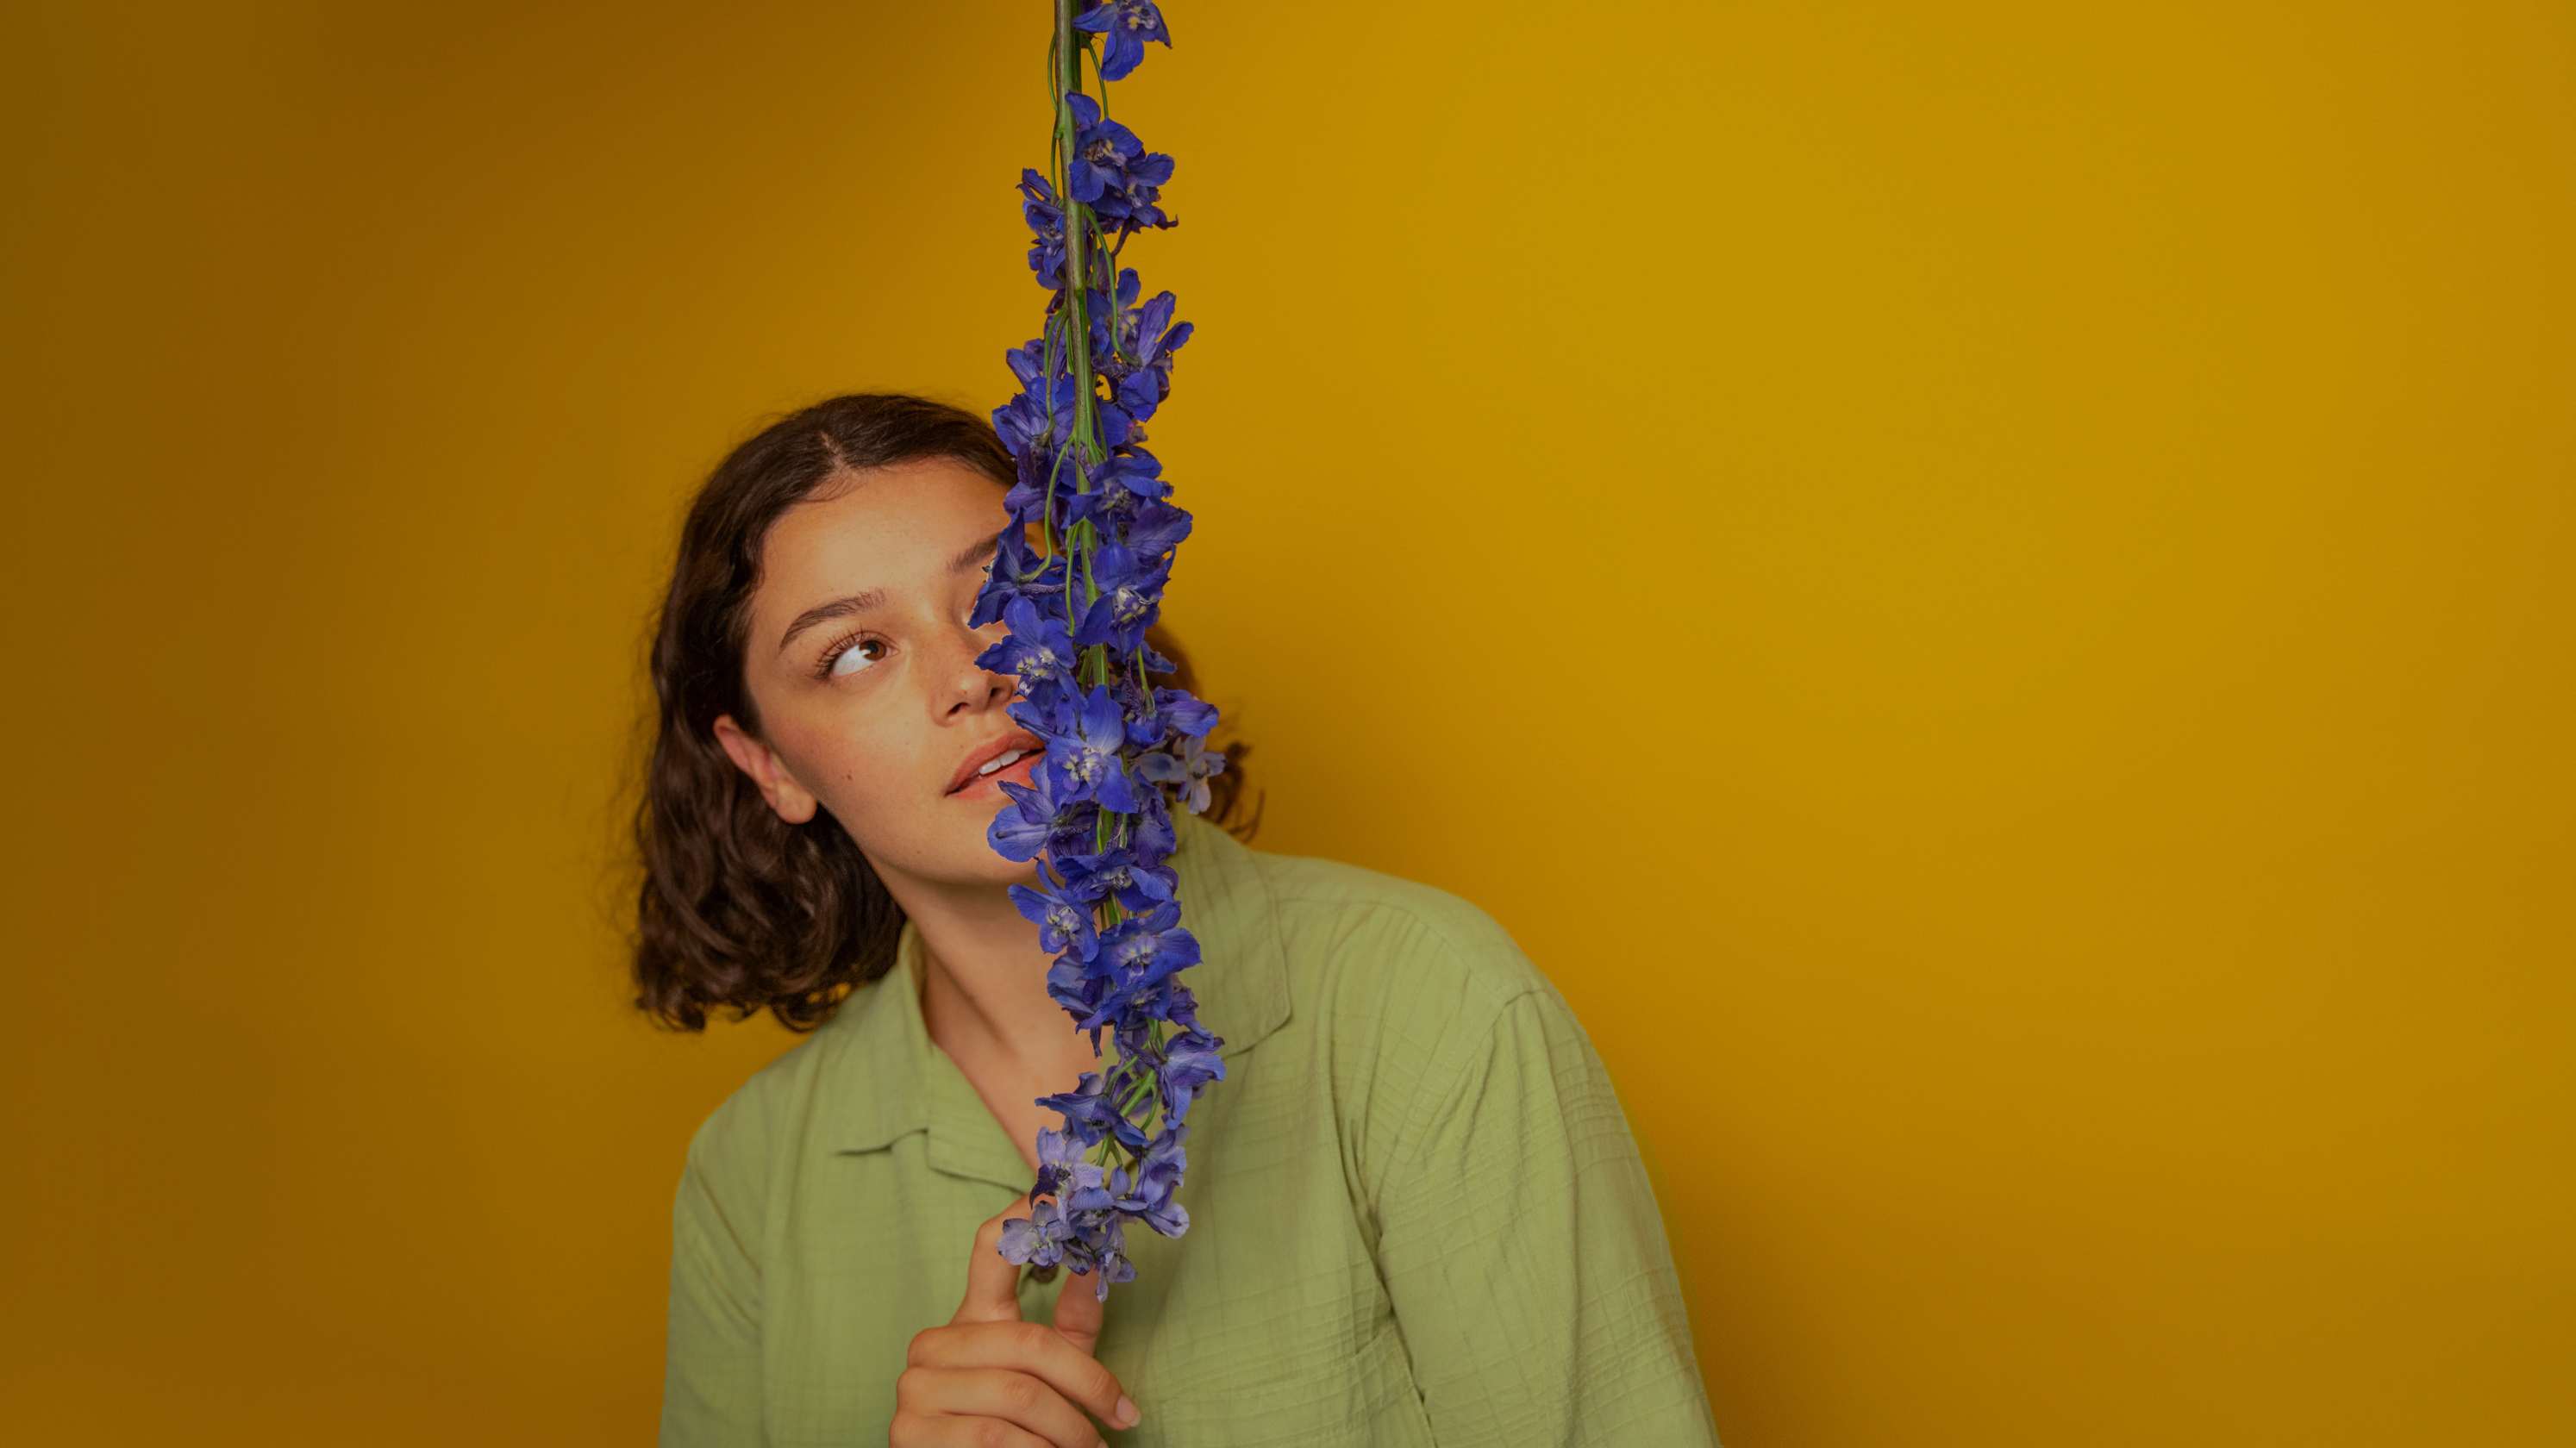 woman holding a stalk of purple flowers against a yellow background